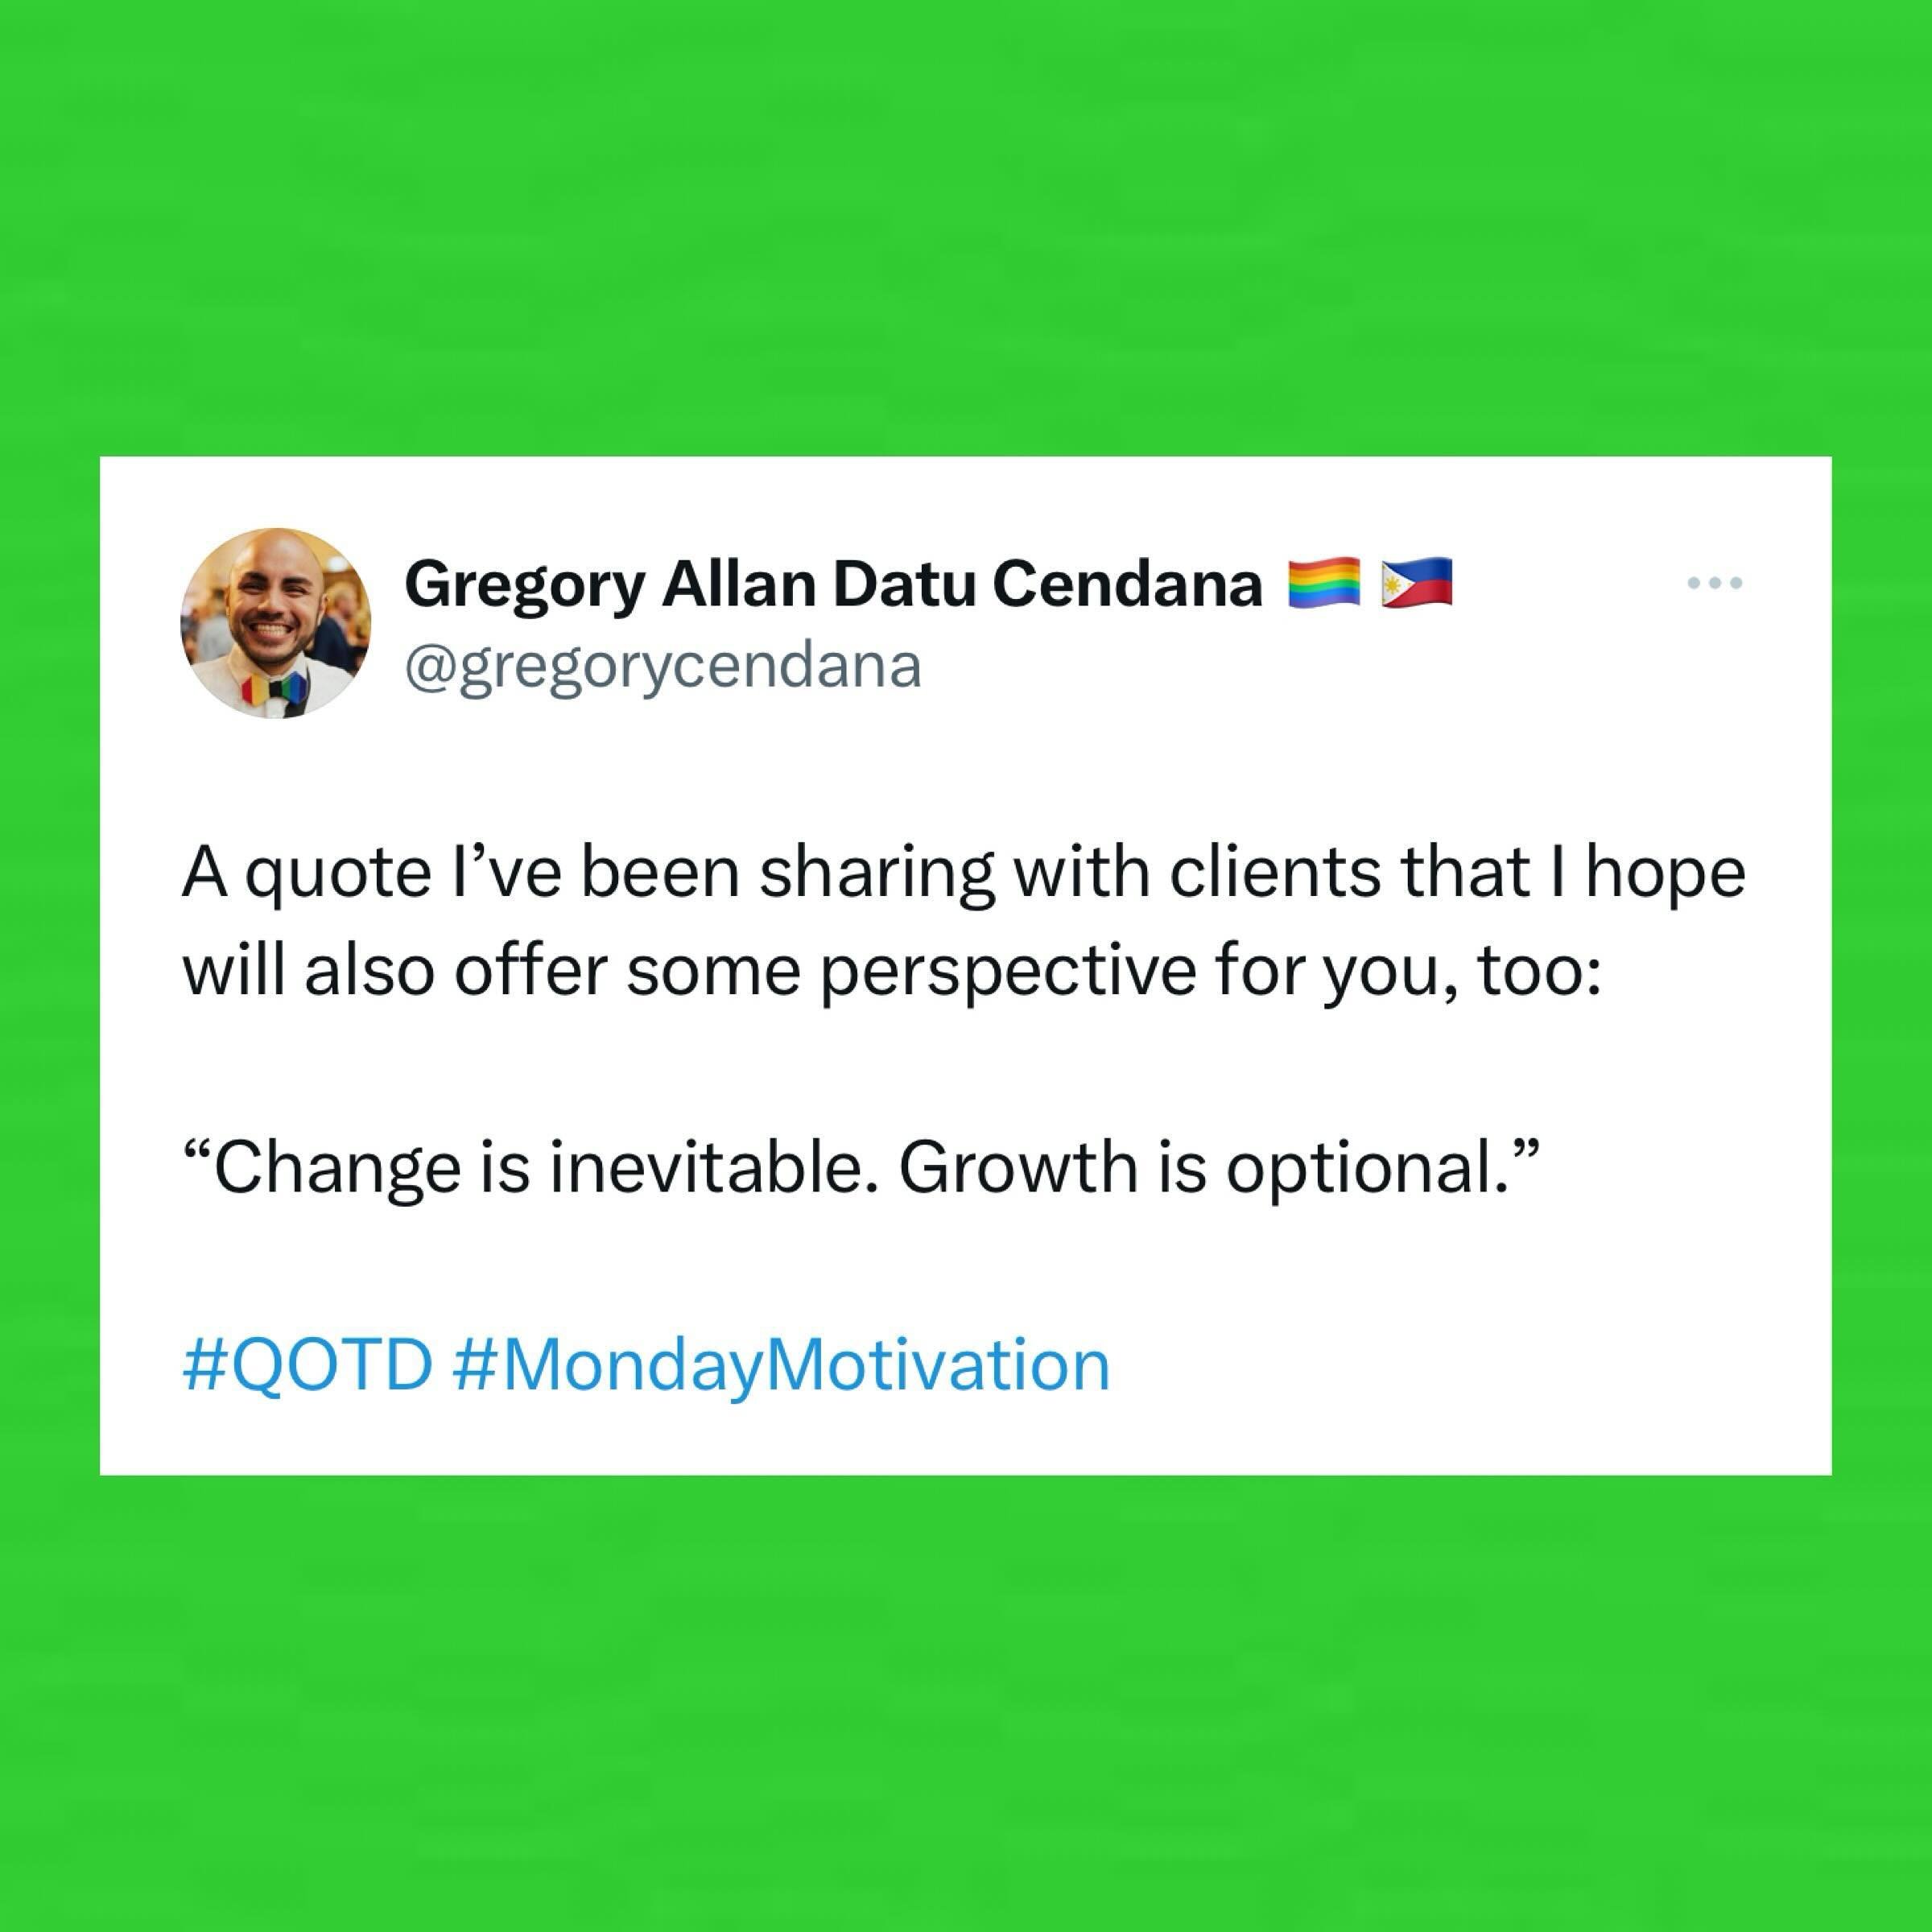 A quote I&rsquo;ve been sharing with clients that I hope will also offer some perspective for you, too:

&ldquo;Change is inevitable. Growth is optional.&rdquo;

#QOTD #MondayMotivation 
&bull;
&bull;
&bull;
&bull;
&bull;
#igers #igdaily #instagood #